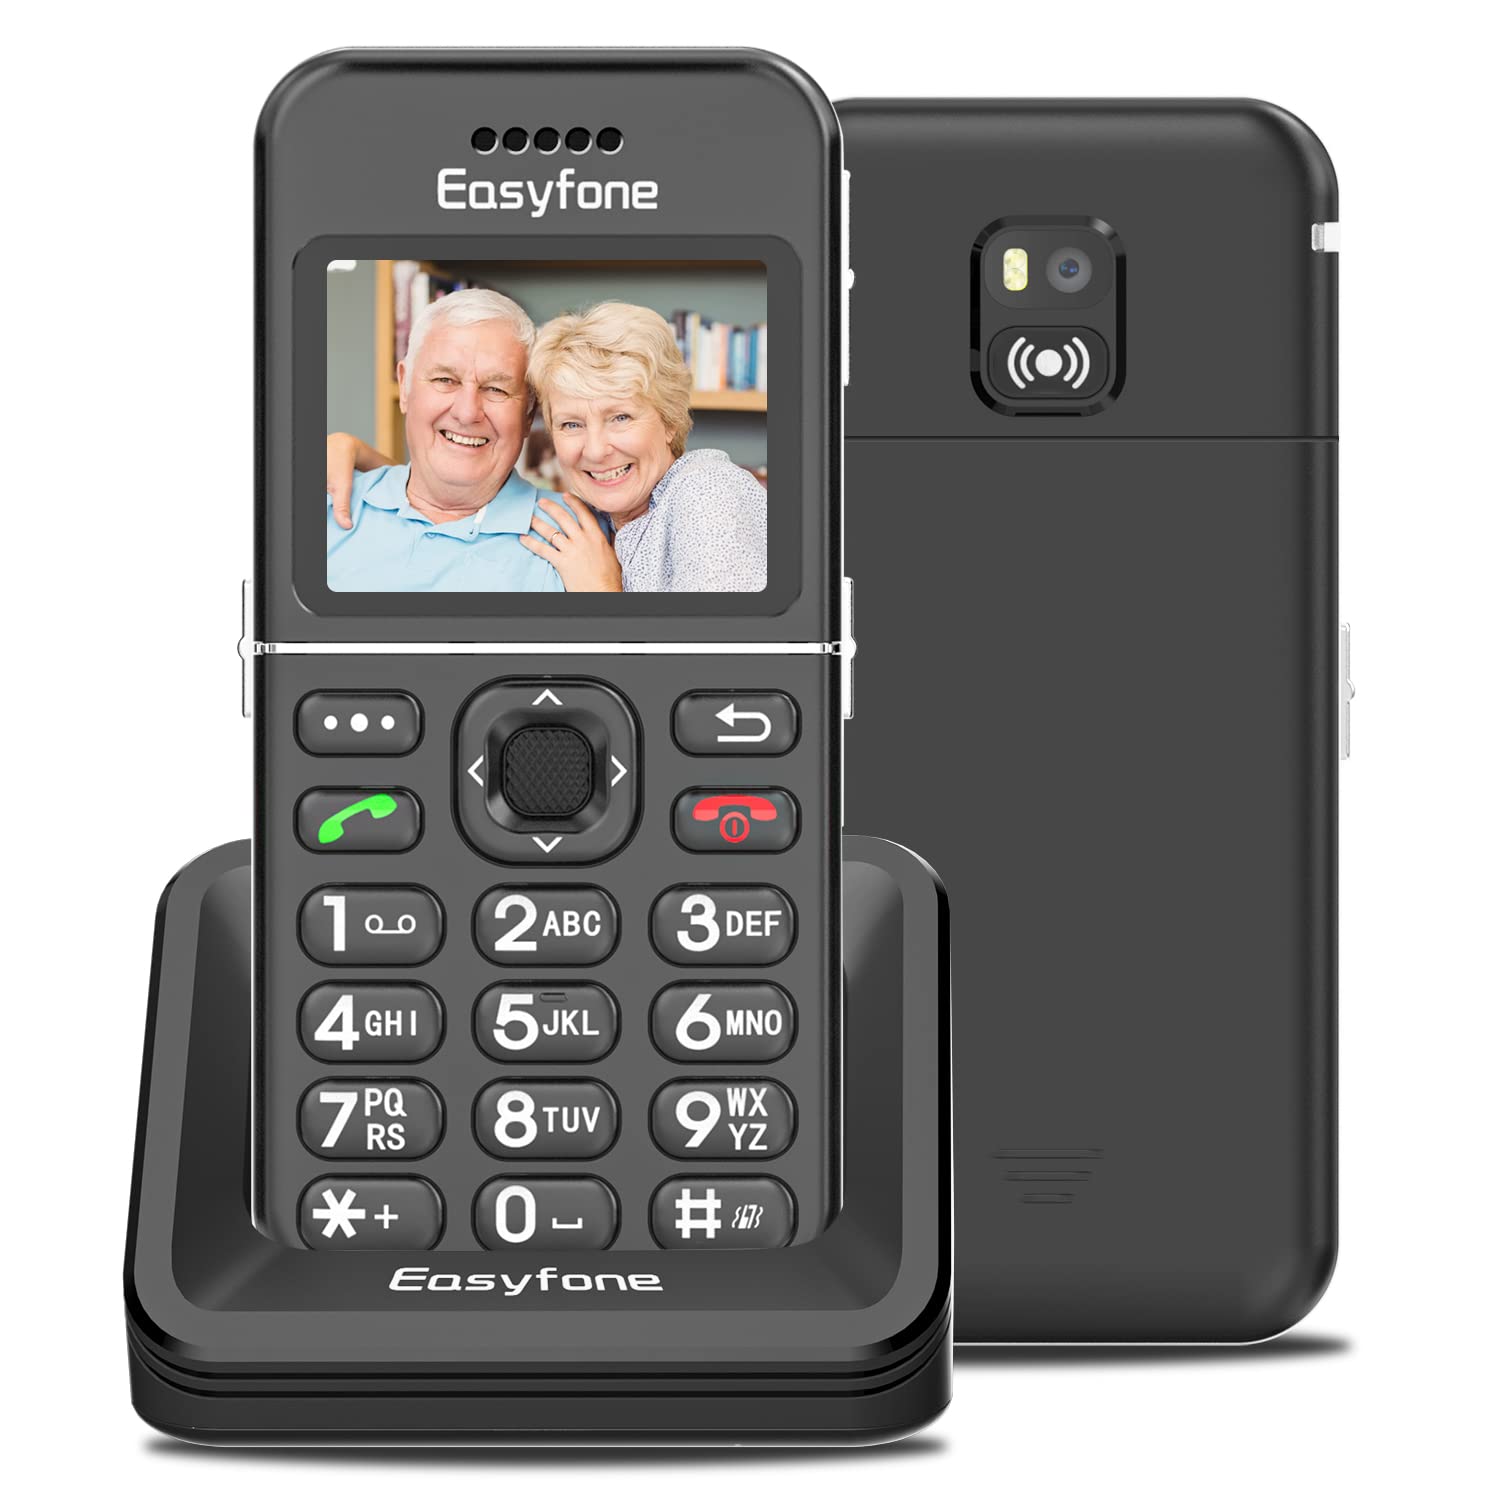 Easyfone T100 4G Unlocked Feature Cell Phone for Seniors | Easy-to-use | Clear Sound | Big Buttons | 2.0'' HD Display | SOS w/GPS | SIM Card & Flexible Data Plans | 1500Mah Battery and Charging Dock